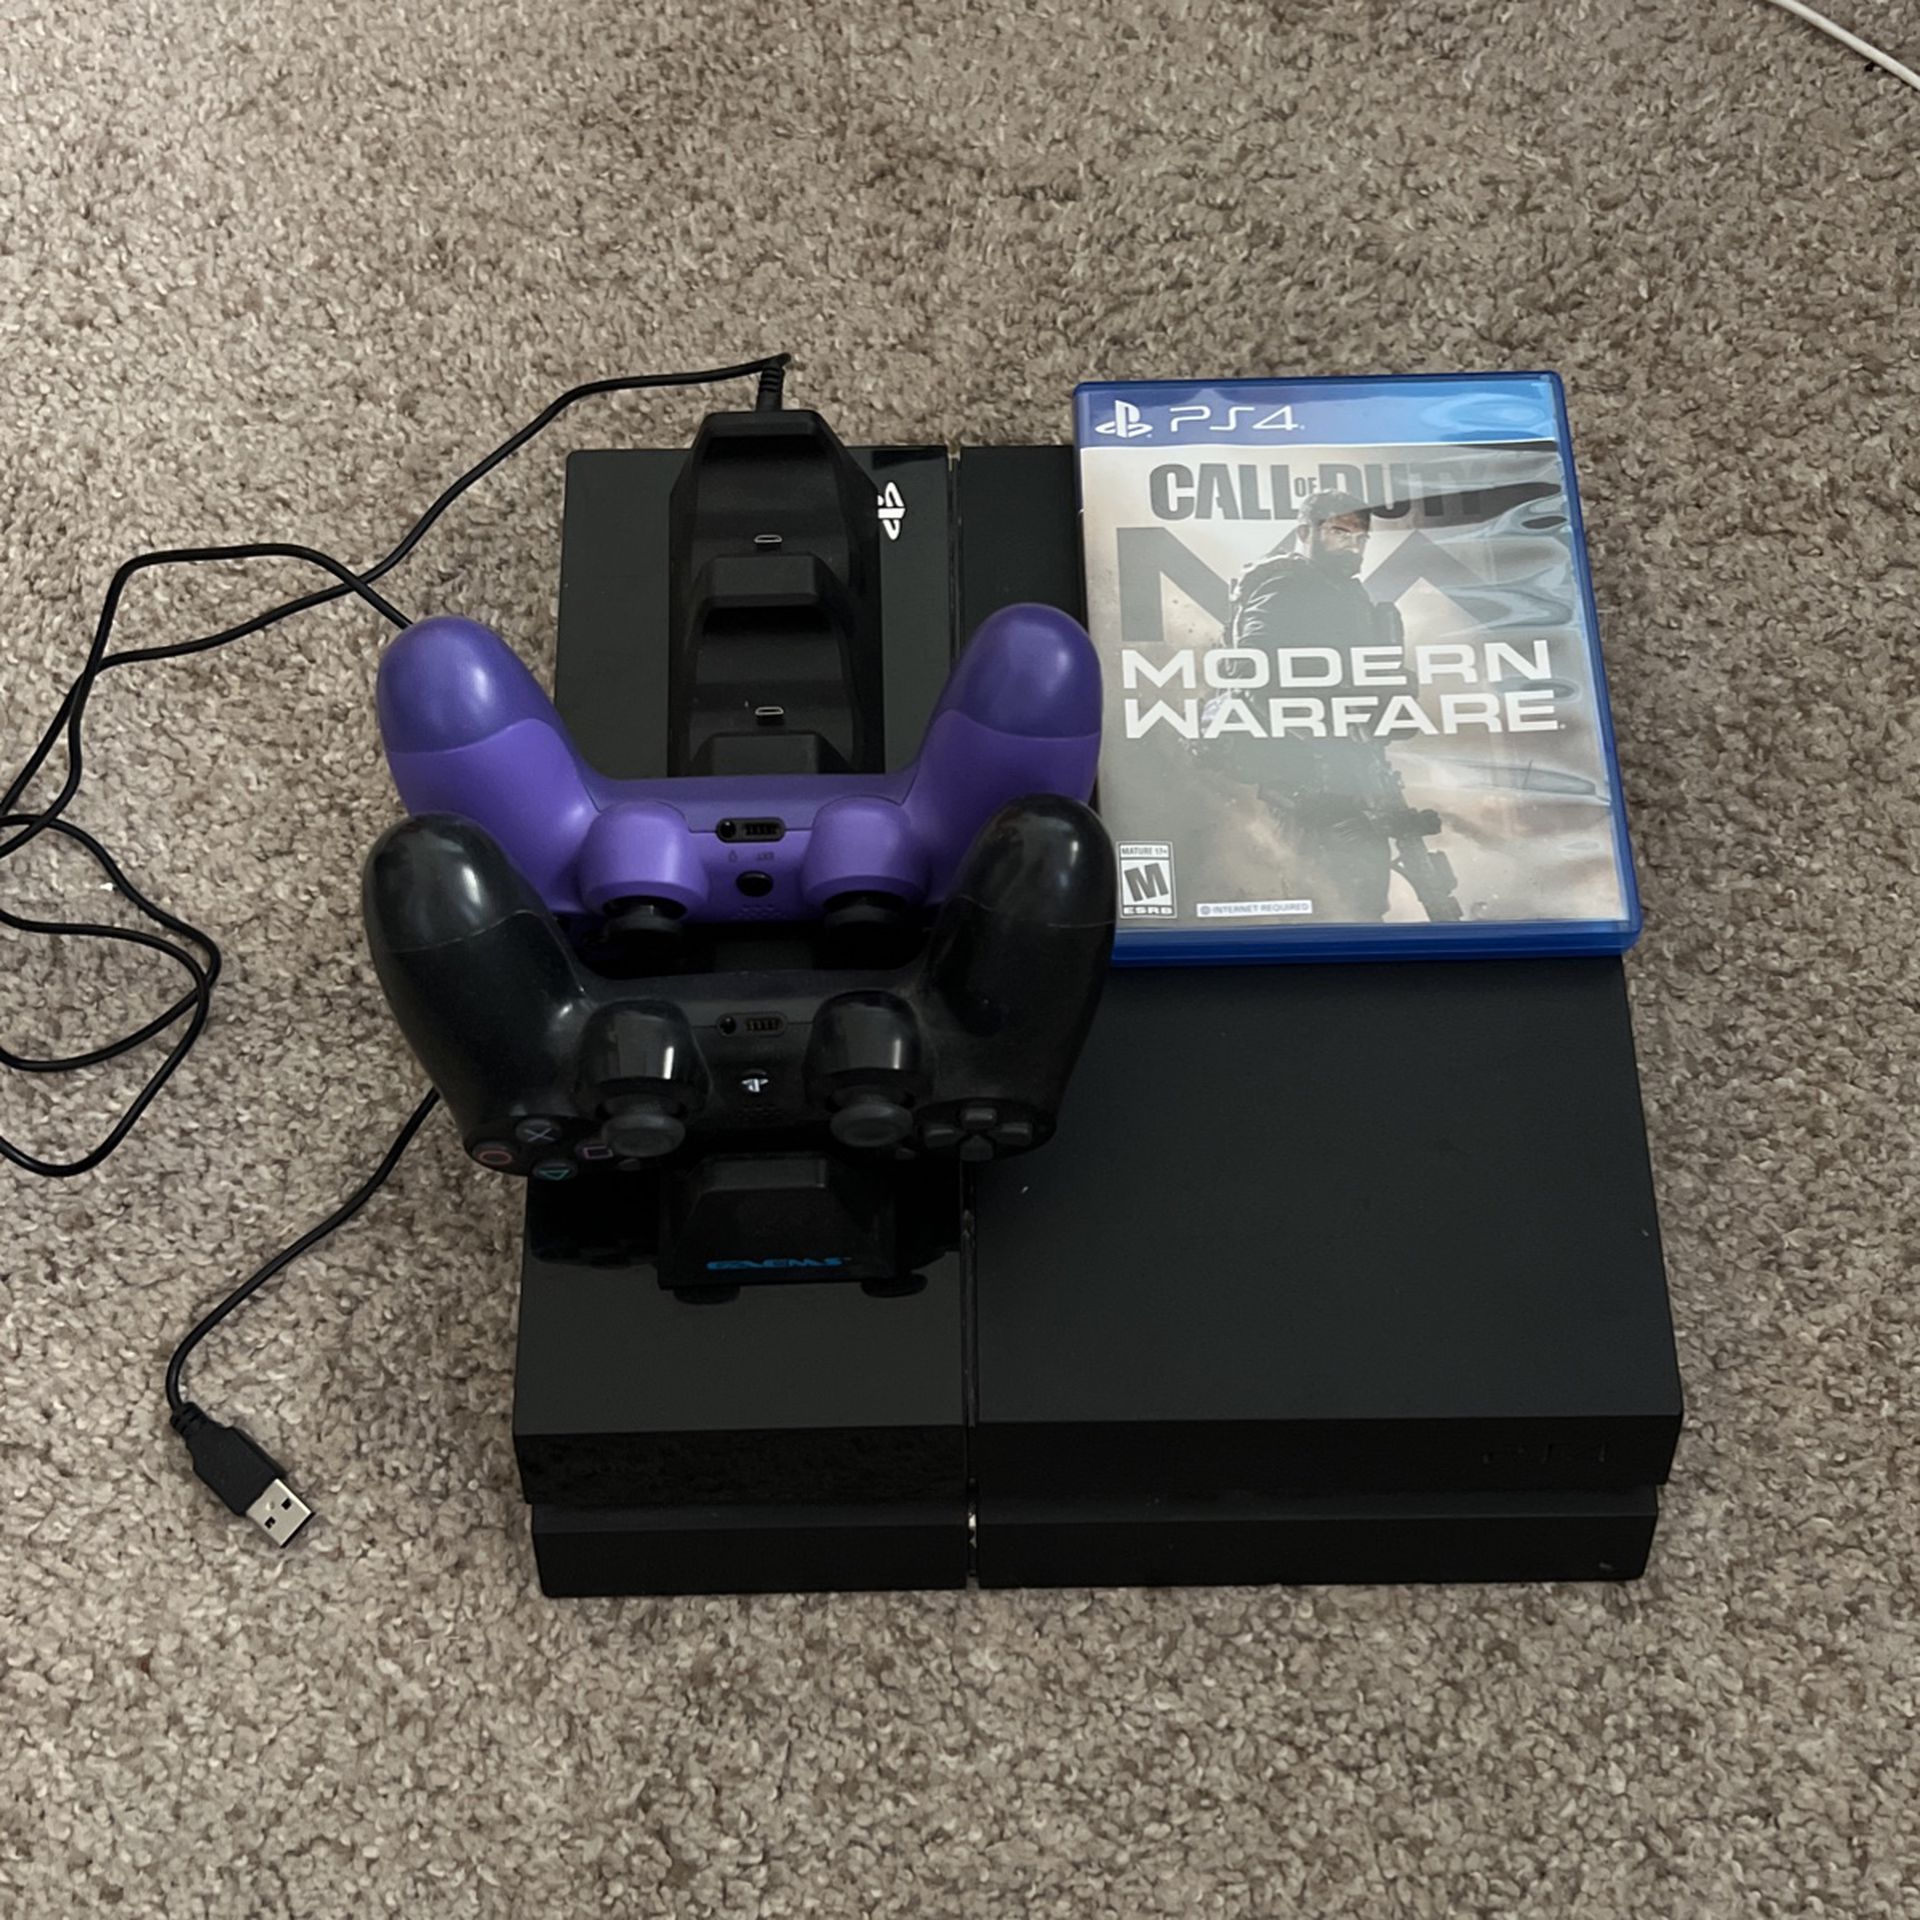 PS4 + Controllers and Game